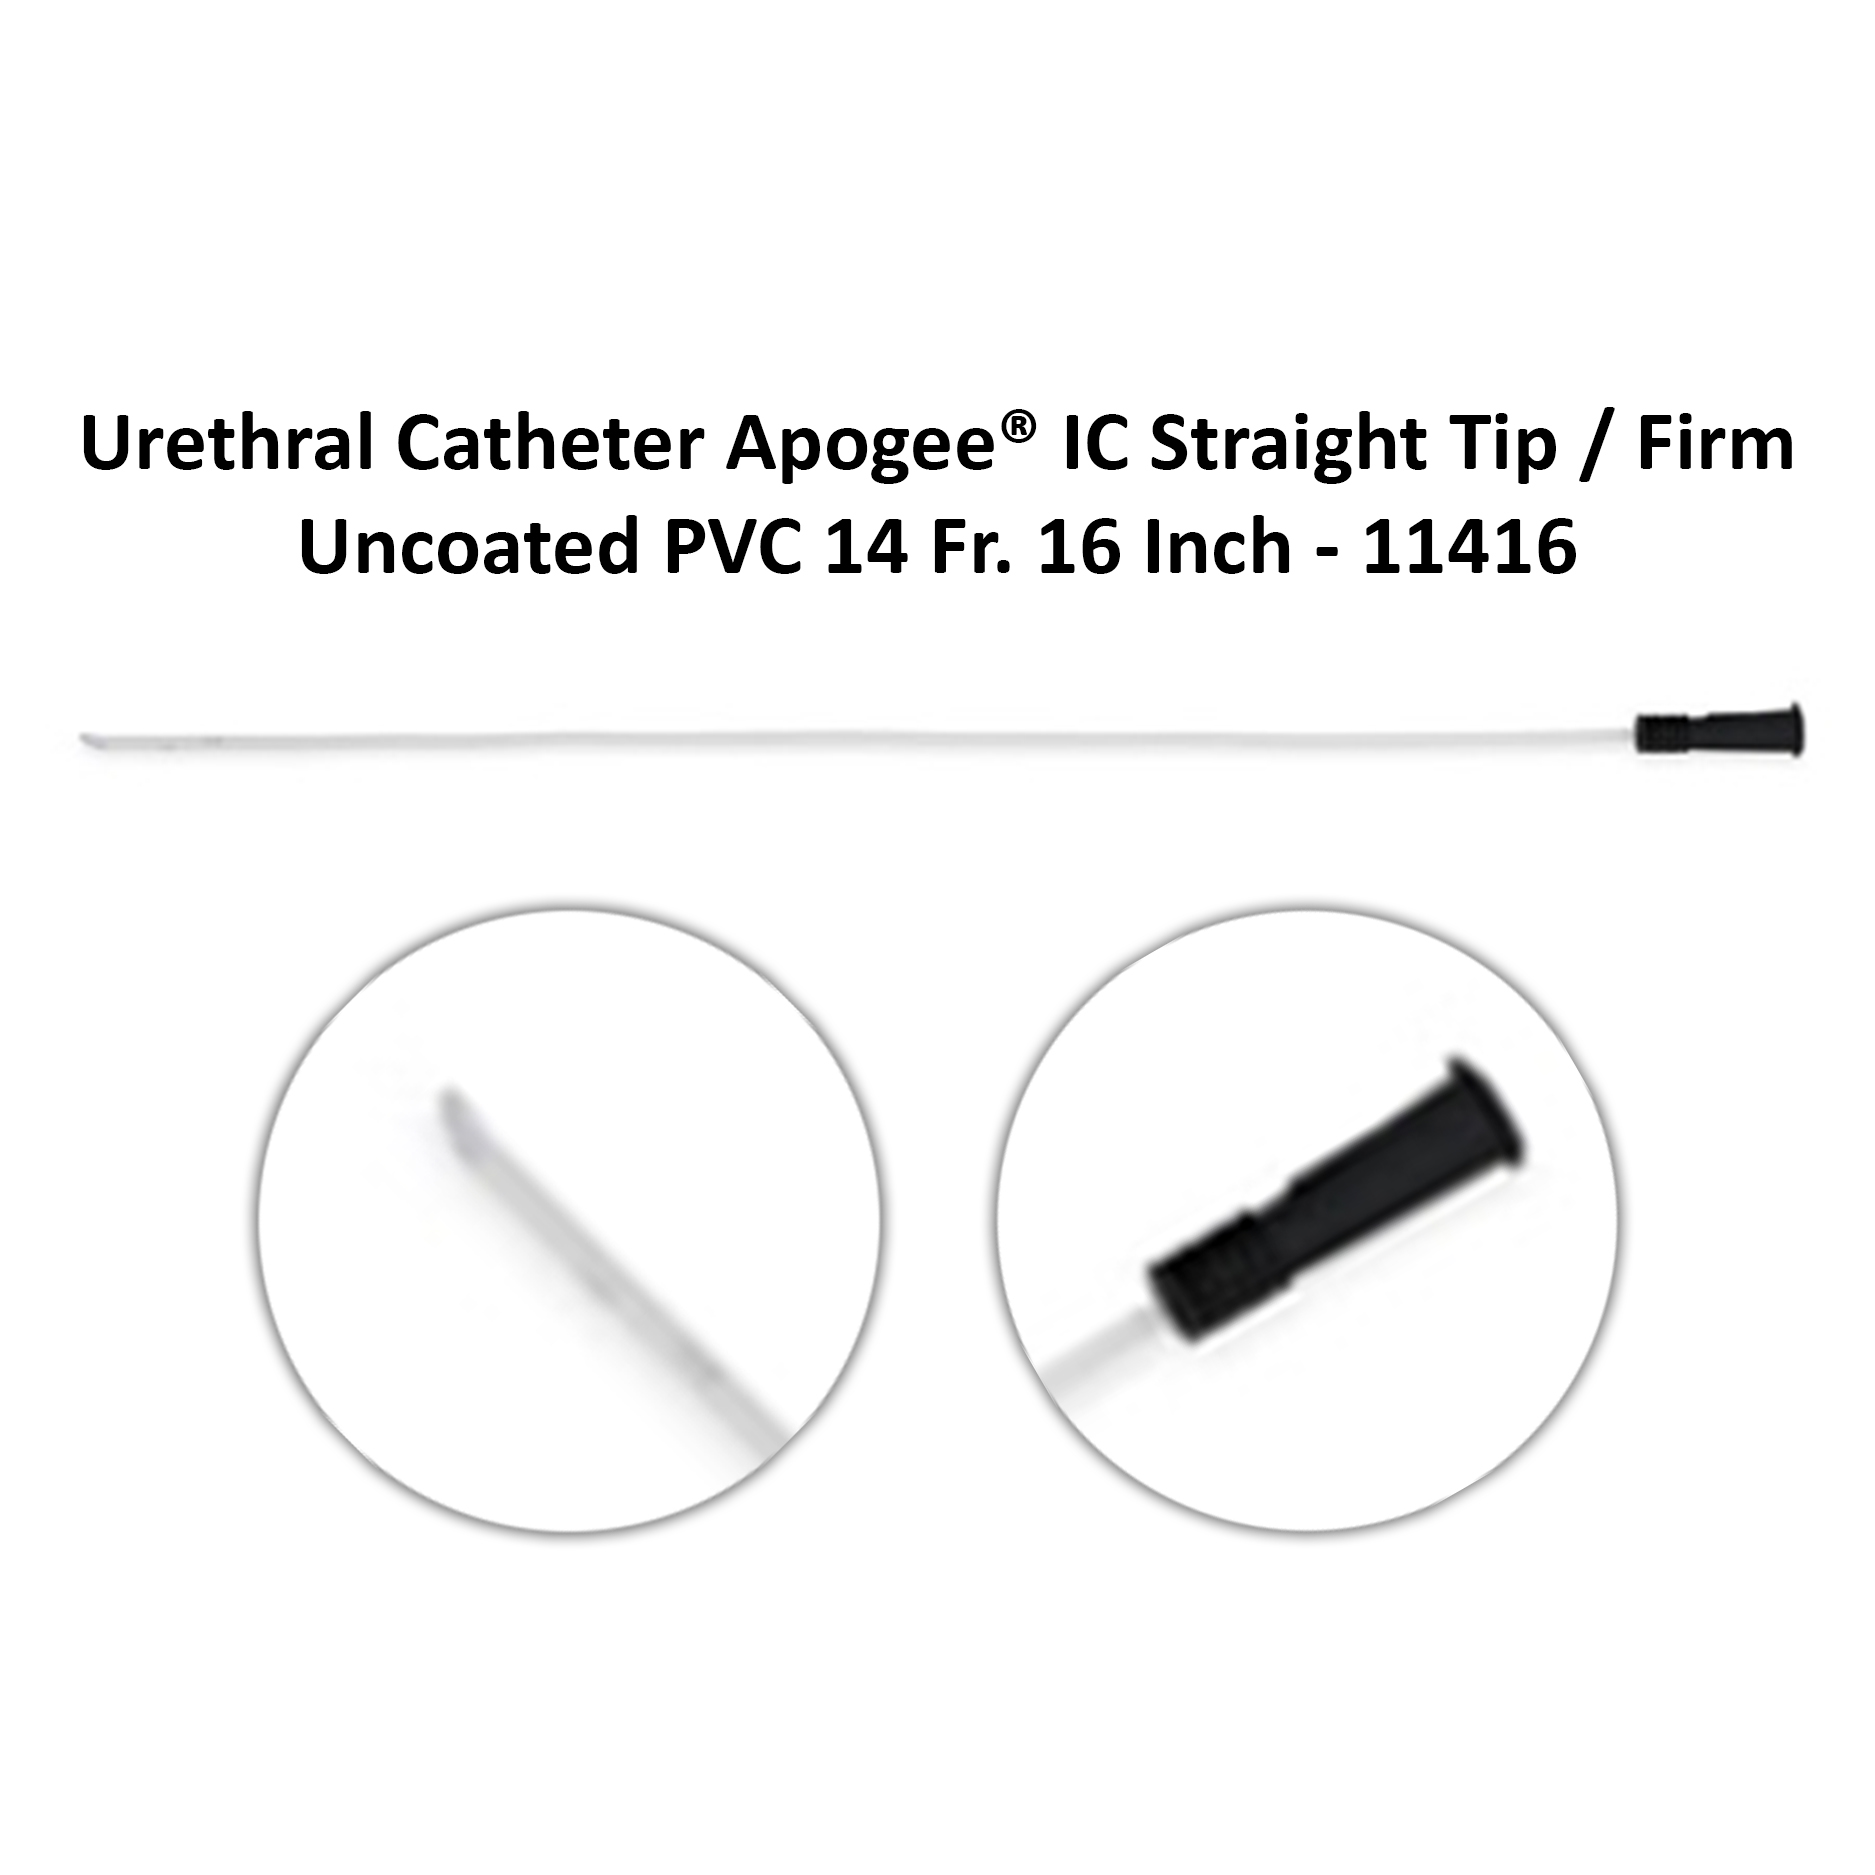 Urethral Catheter Apogee® IC Straight Tip / Firm Uncoated PVC 14 Fr. 16 Inch - 11416 Michigan | USA